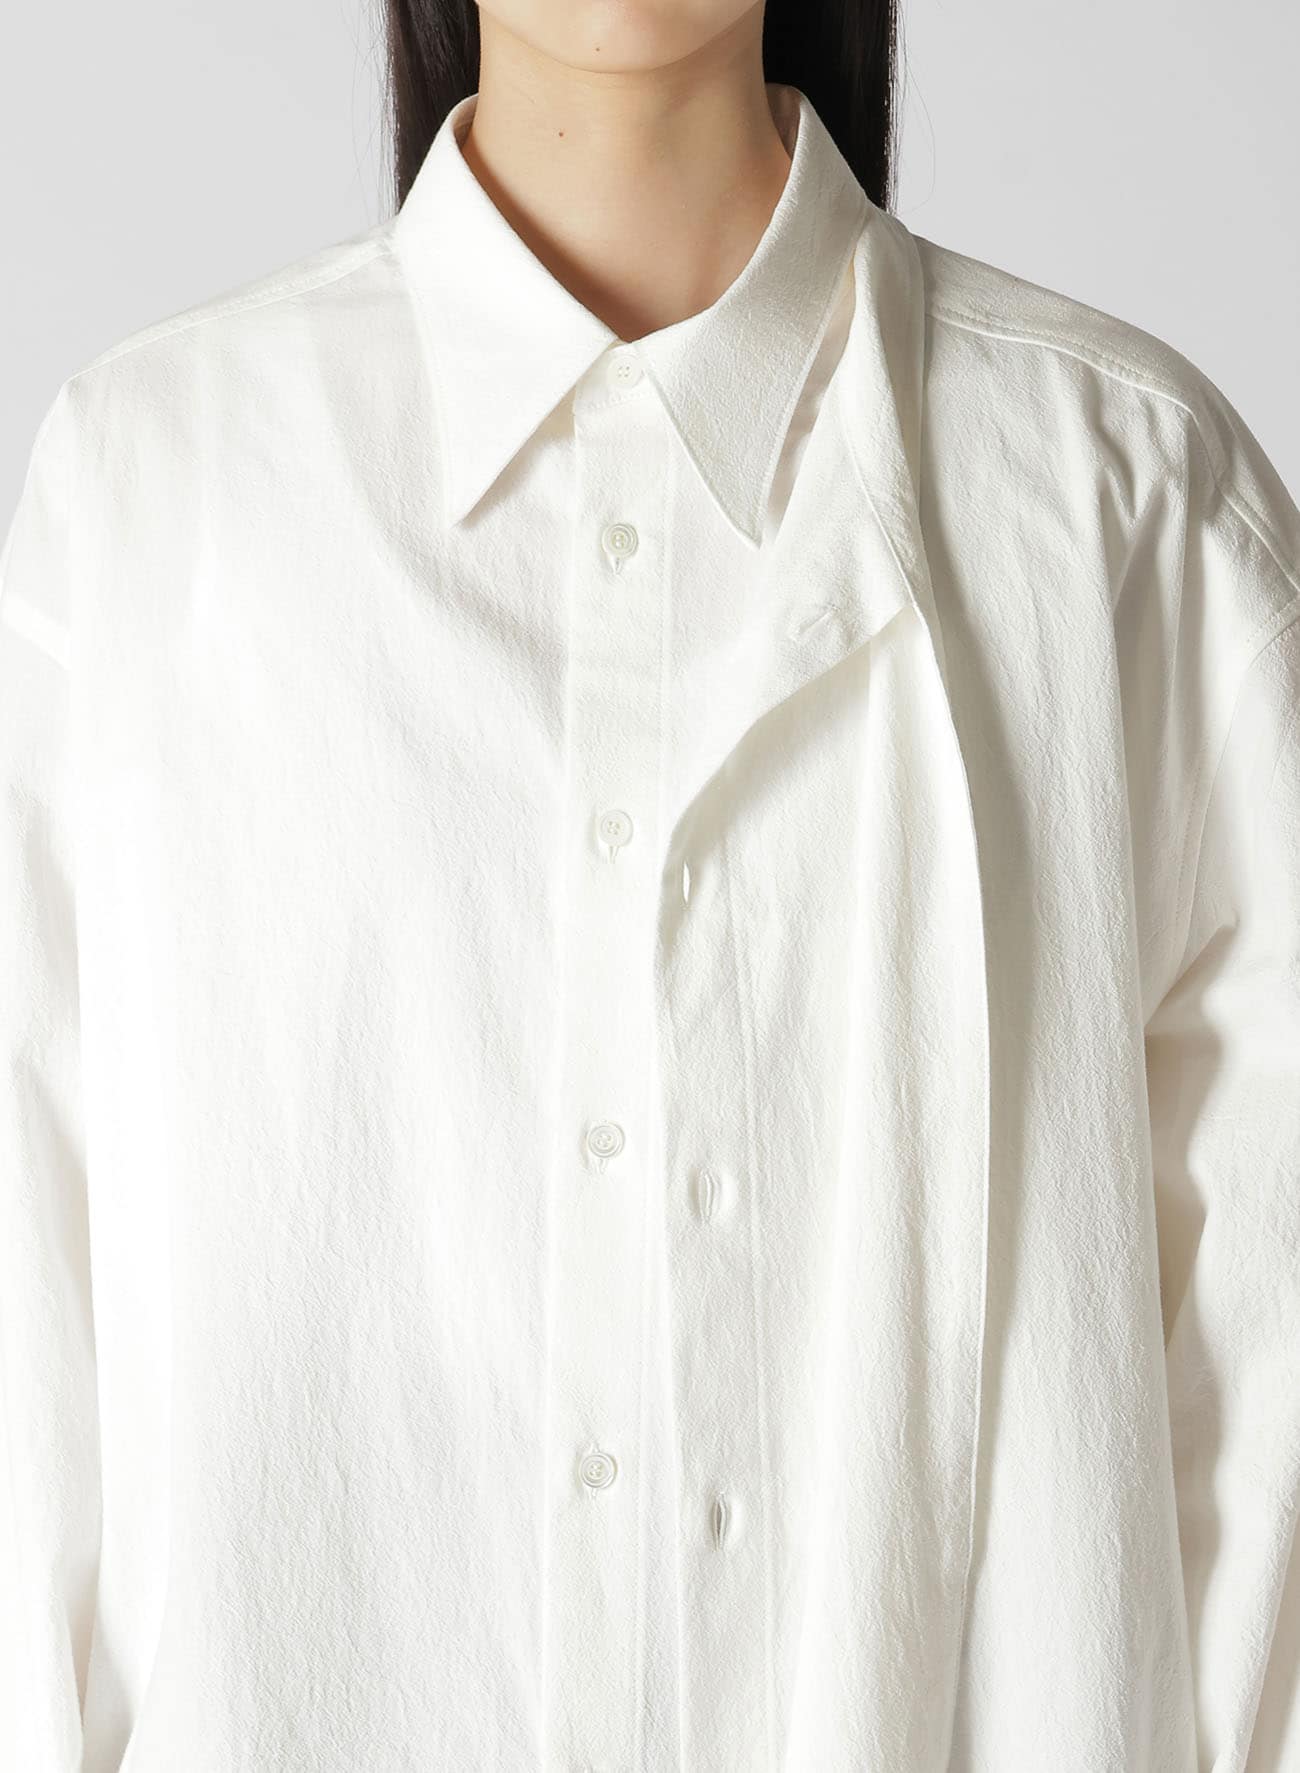 【7/17 12:00(JST) Release】HIGH TWISTED COTTON DOUBLE LAYERED WING BOWTIE SHIRT